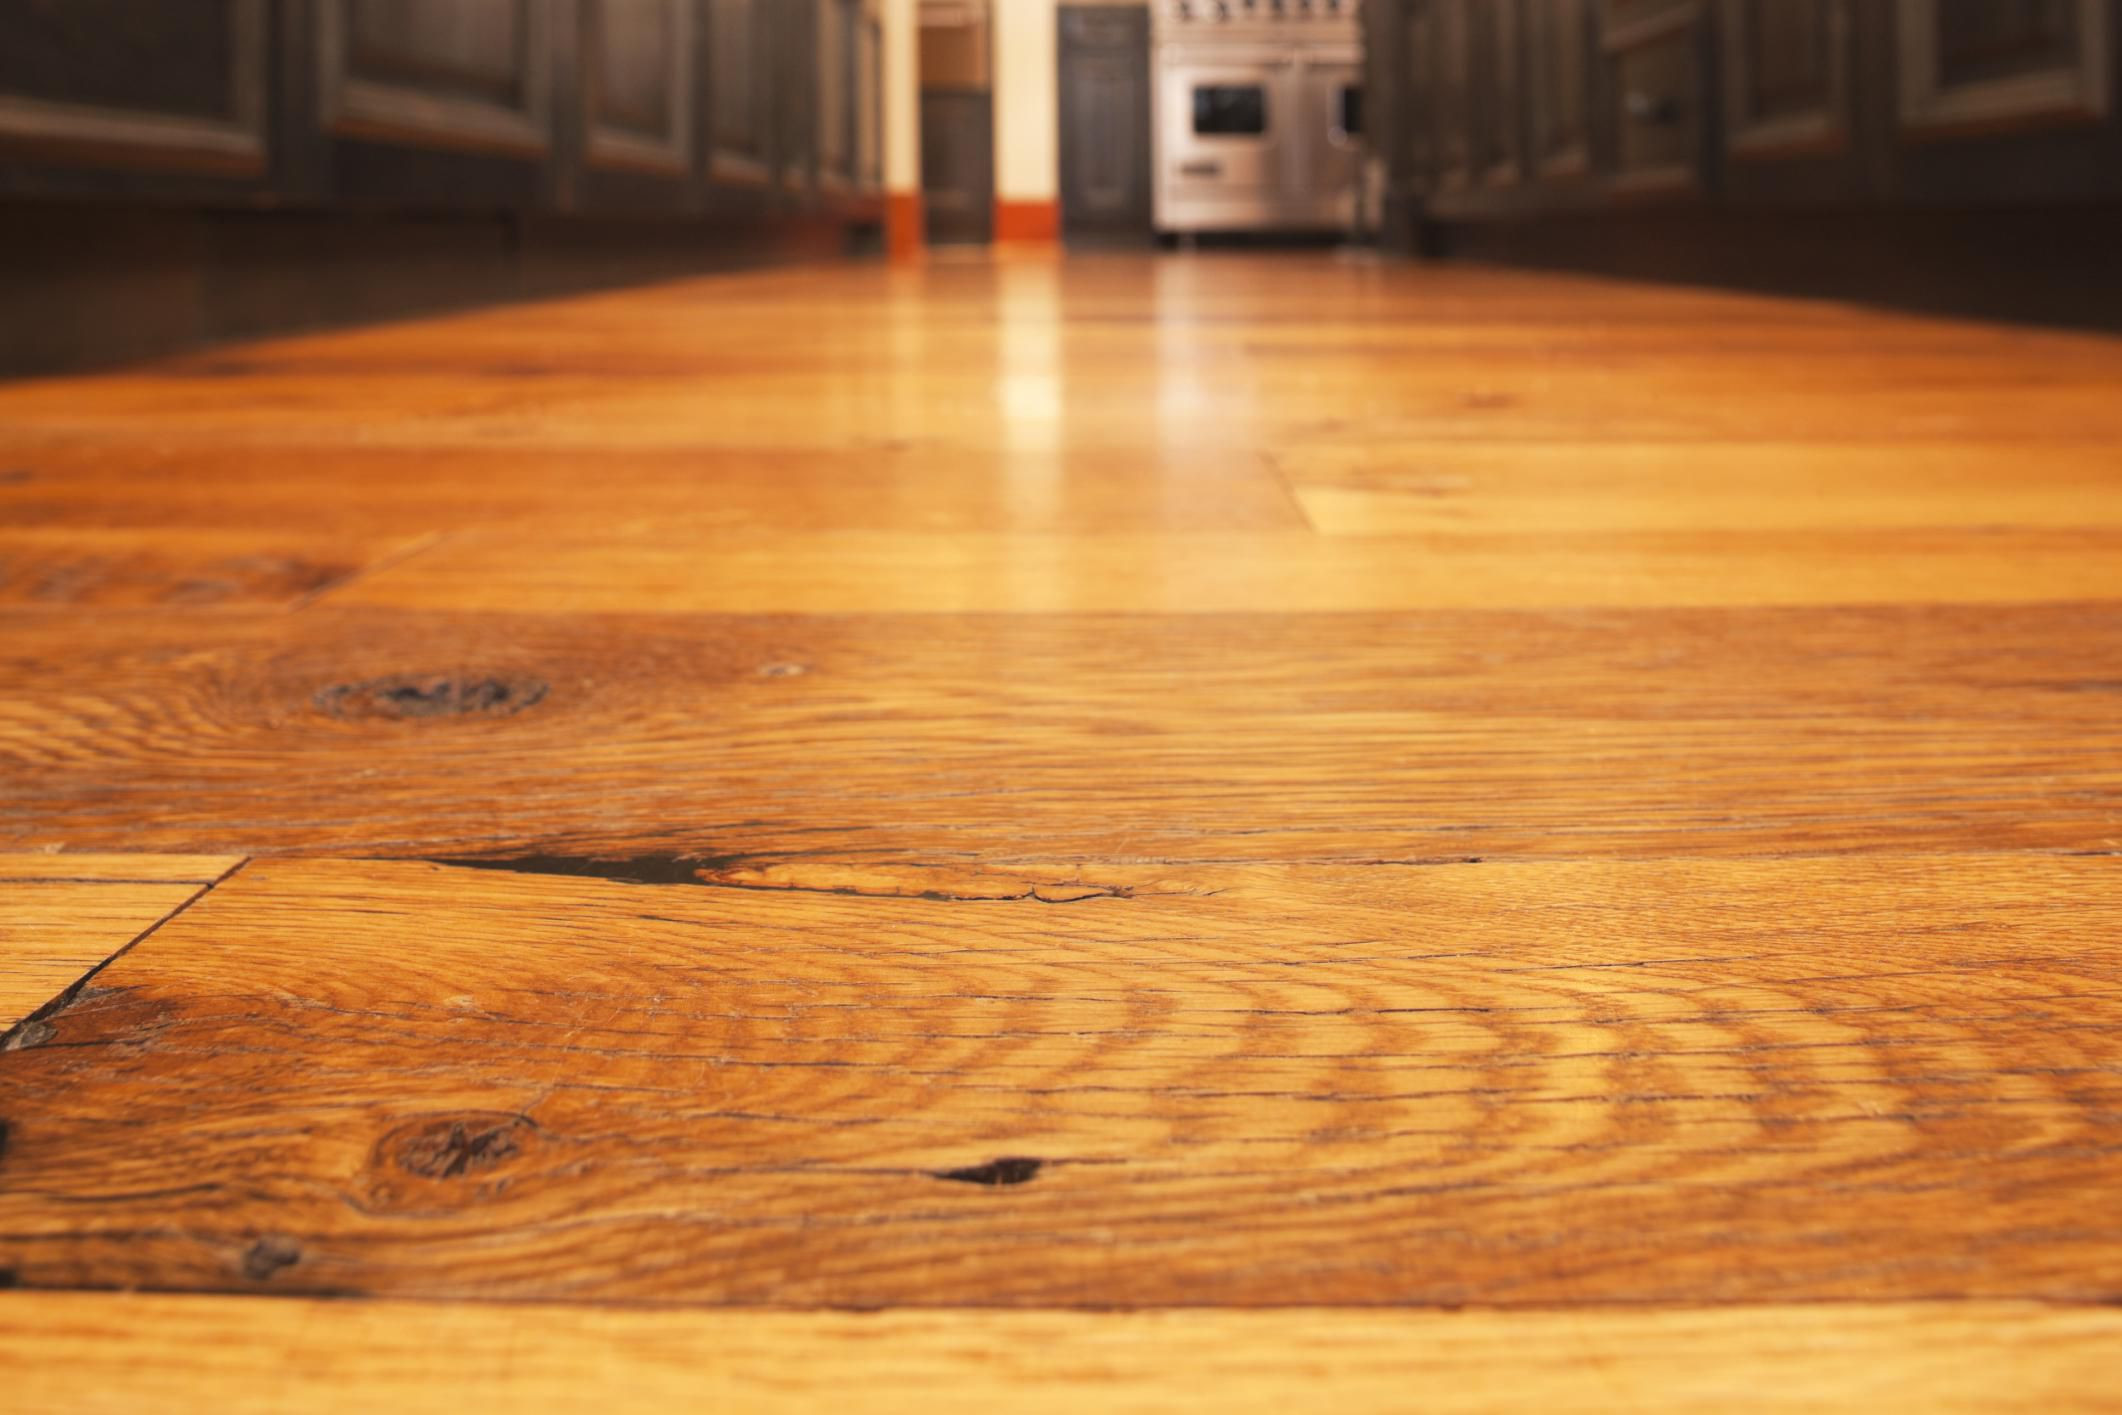 24 Recommended How Long Does It Take to Refinish Hardwood Floors 2023 free download how long does it take to refinish hardwood floors of how to sand hardwood floors pertaining to 185126347 56a49f3d5f9b58b7d0d7e154